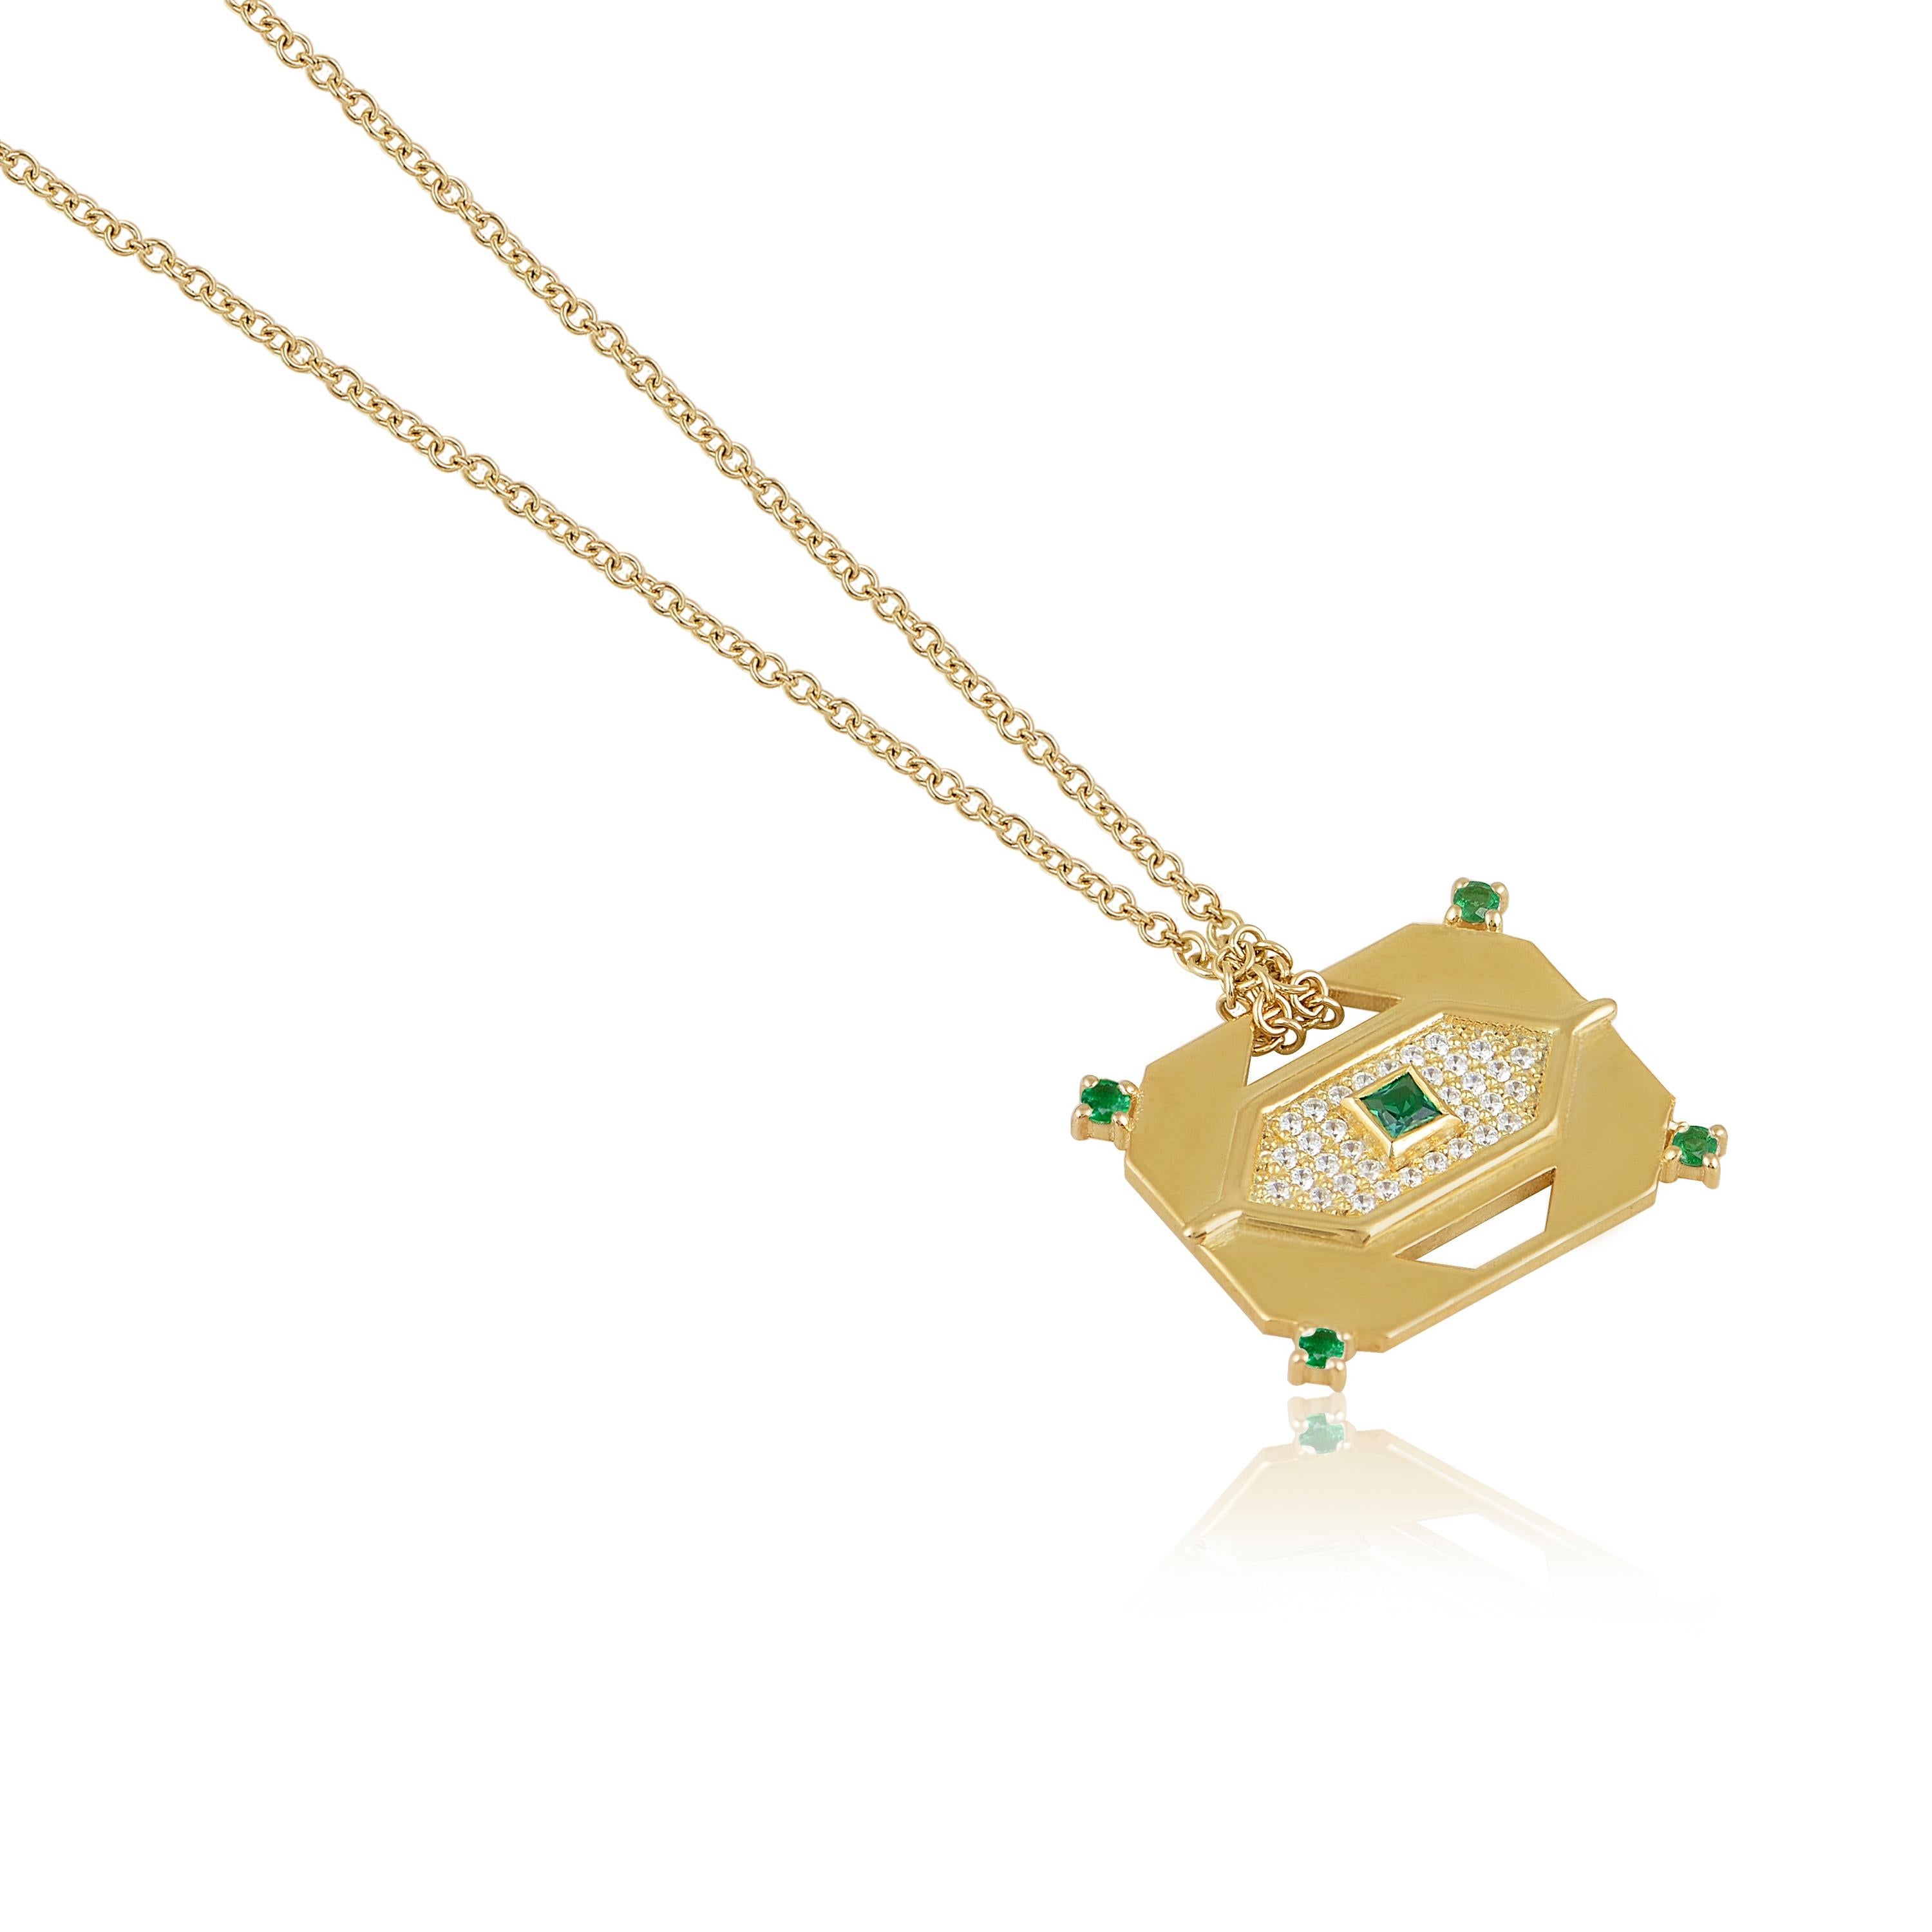 Designer: Alexia Gryllaki

Dimensions: motif L15x20mm, chain 450mm
Weight: approximately 6.1g (inc. chain) 
Barcode: NEX5004


Gem Tags pendant in 18 karat yellow gold with a 450mm chain, set with round brilliant-cut colorless diamonds approx.